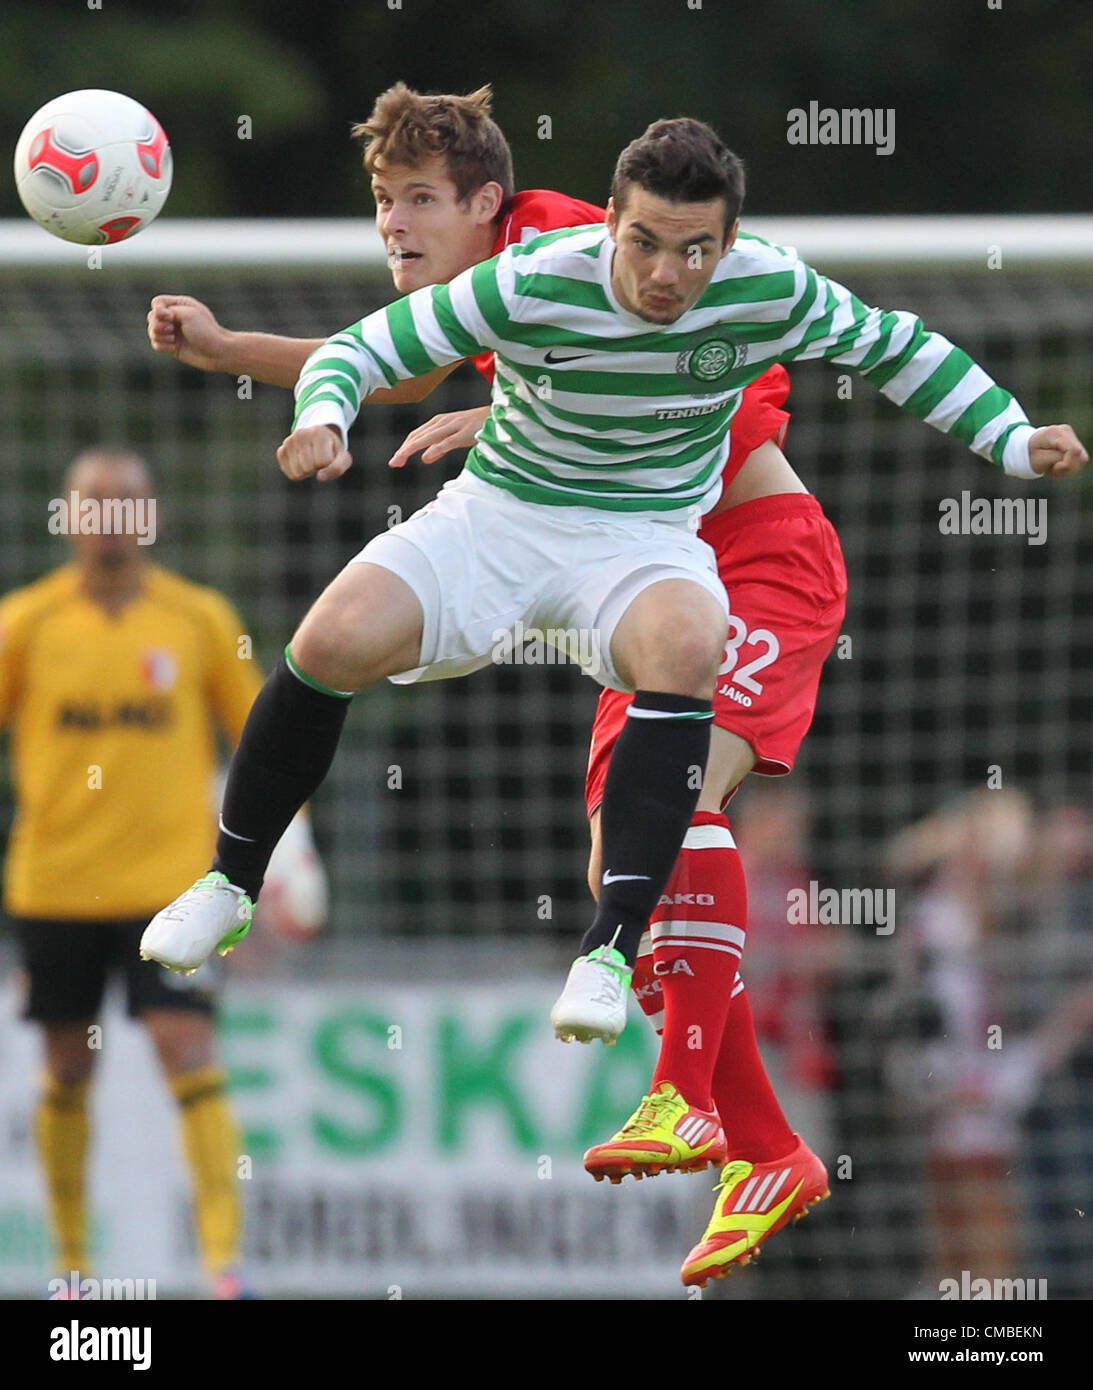 10.07.2012. Donauwoerth, Germany.  Glasgow's Tony Watt (FRONT) and Augsburg's Matthias Strohmaie vie for the ball during a soccer test match between FC Augsburg and Celtic Glasgow in Donauwoerth, Germany, 10 July 2012. Stock Photo